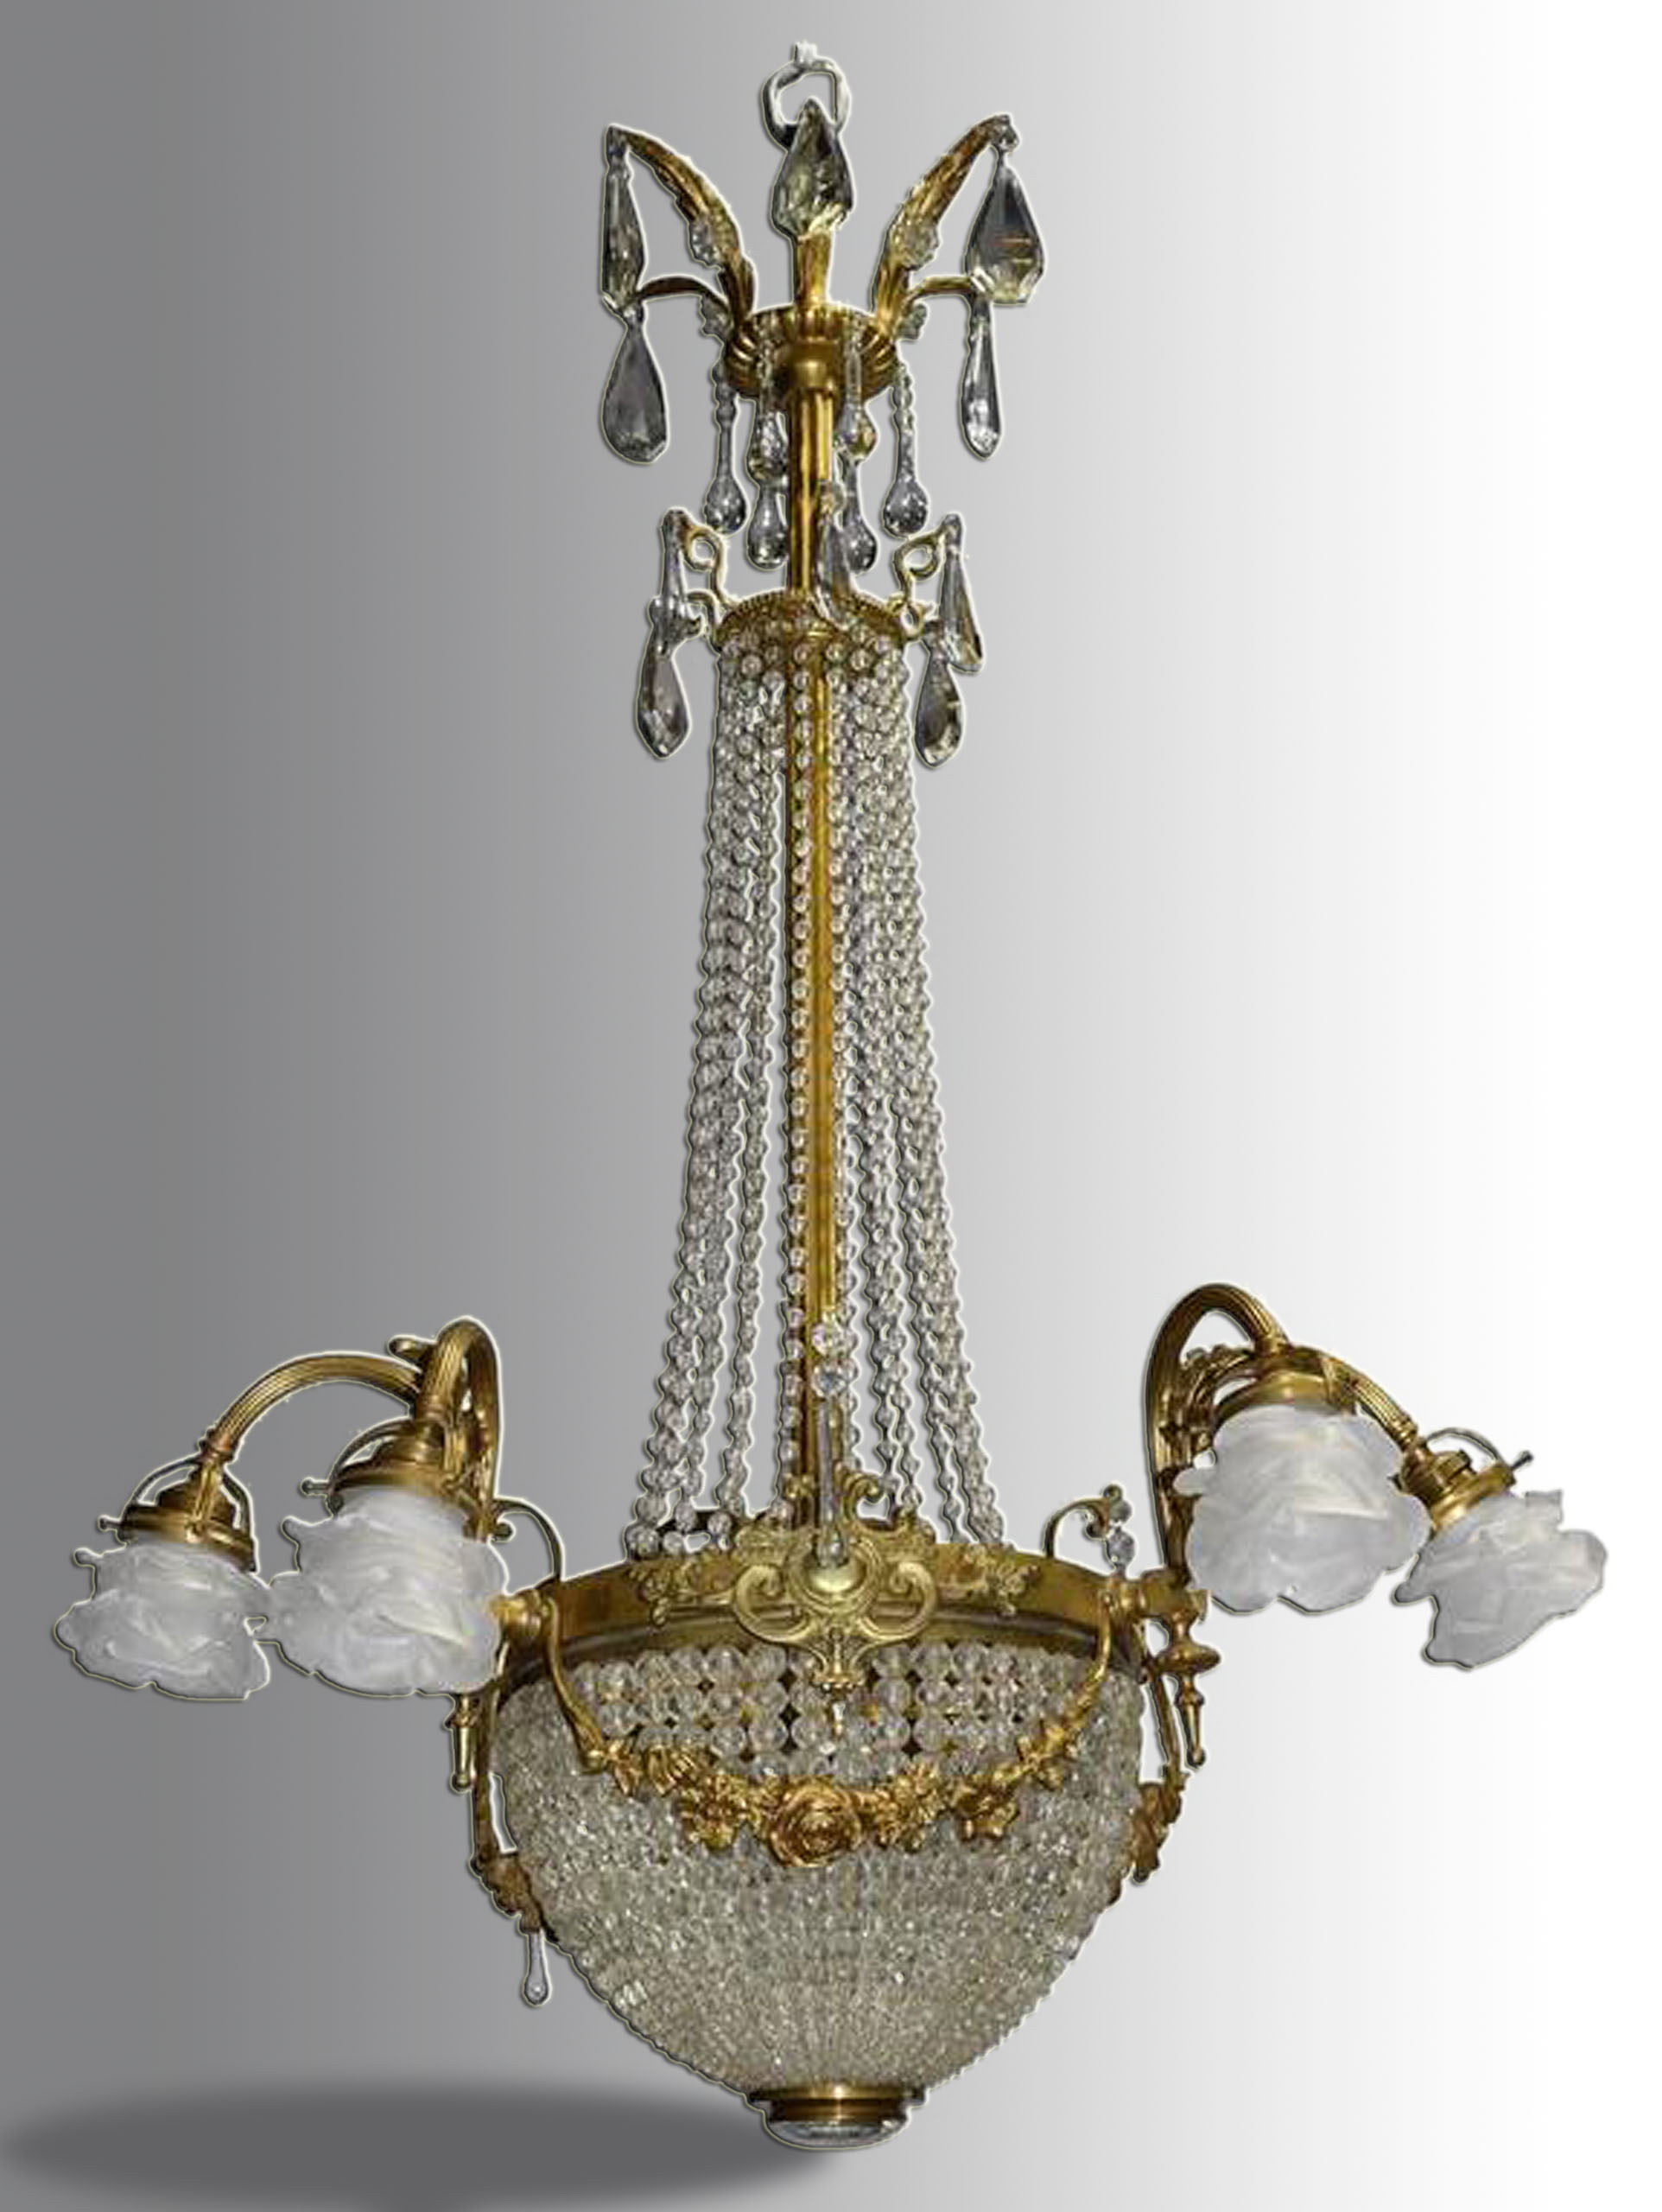 Vintage Circa 1920 French Crystal Flowers Chandelier